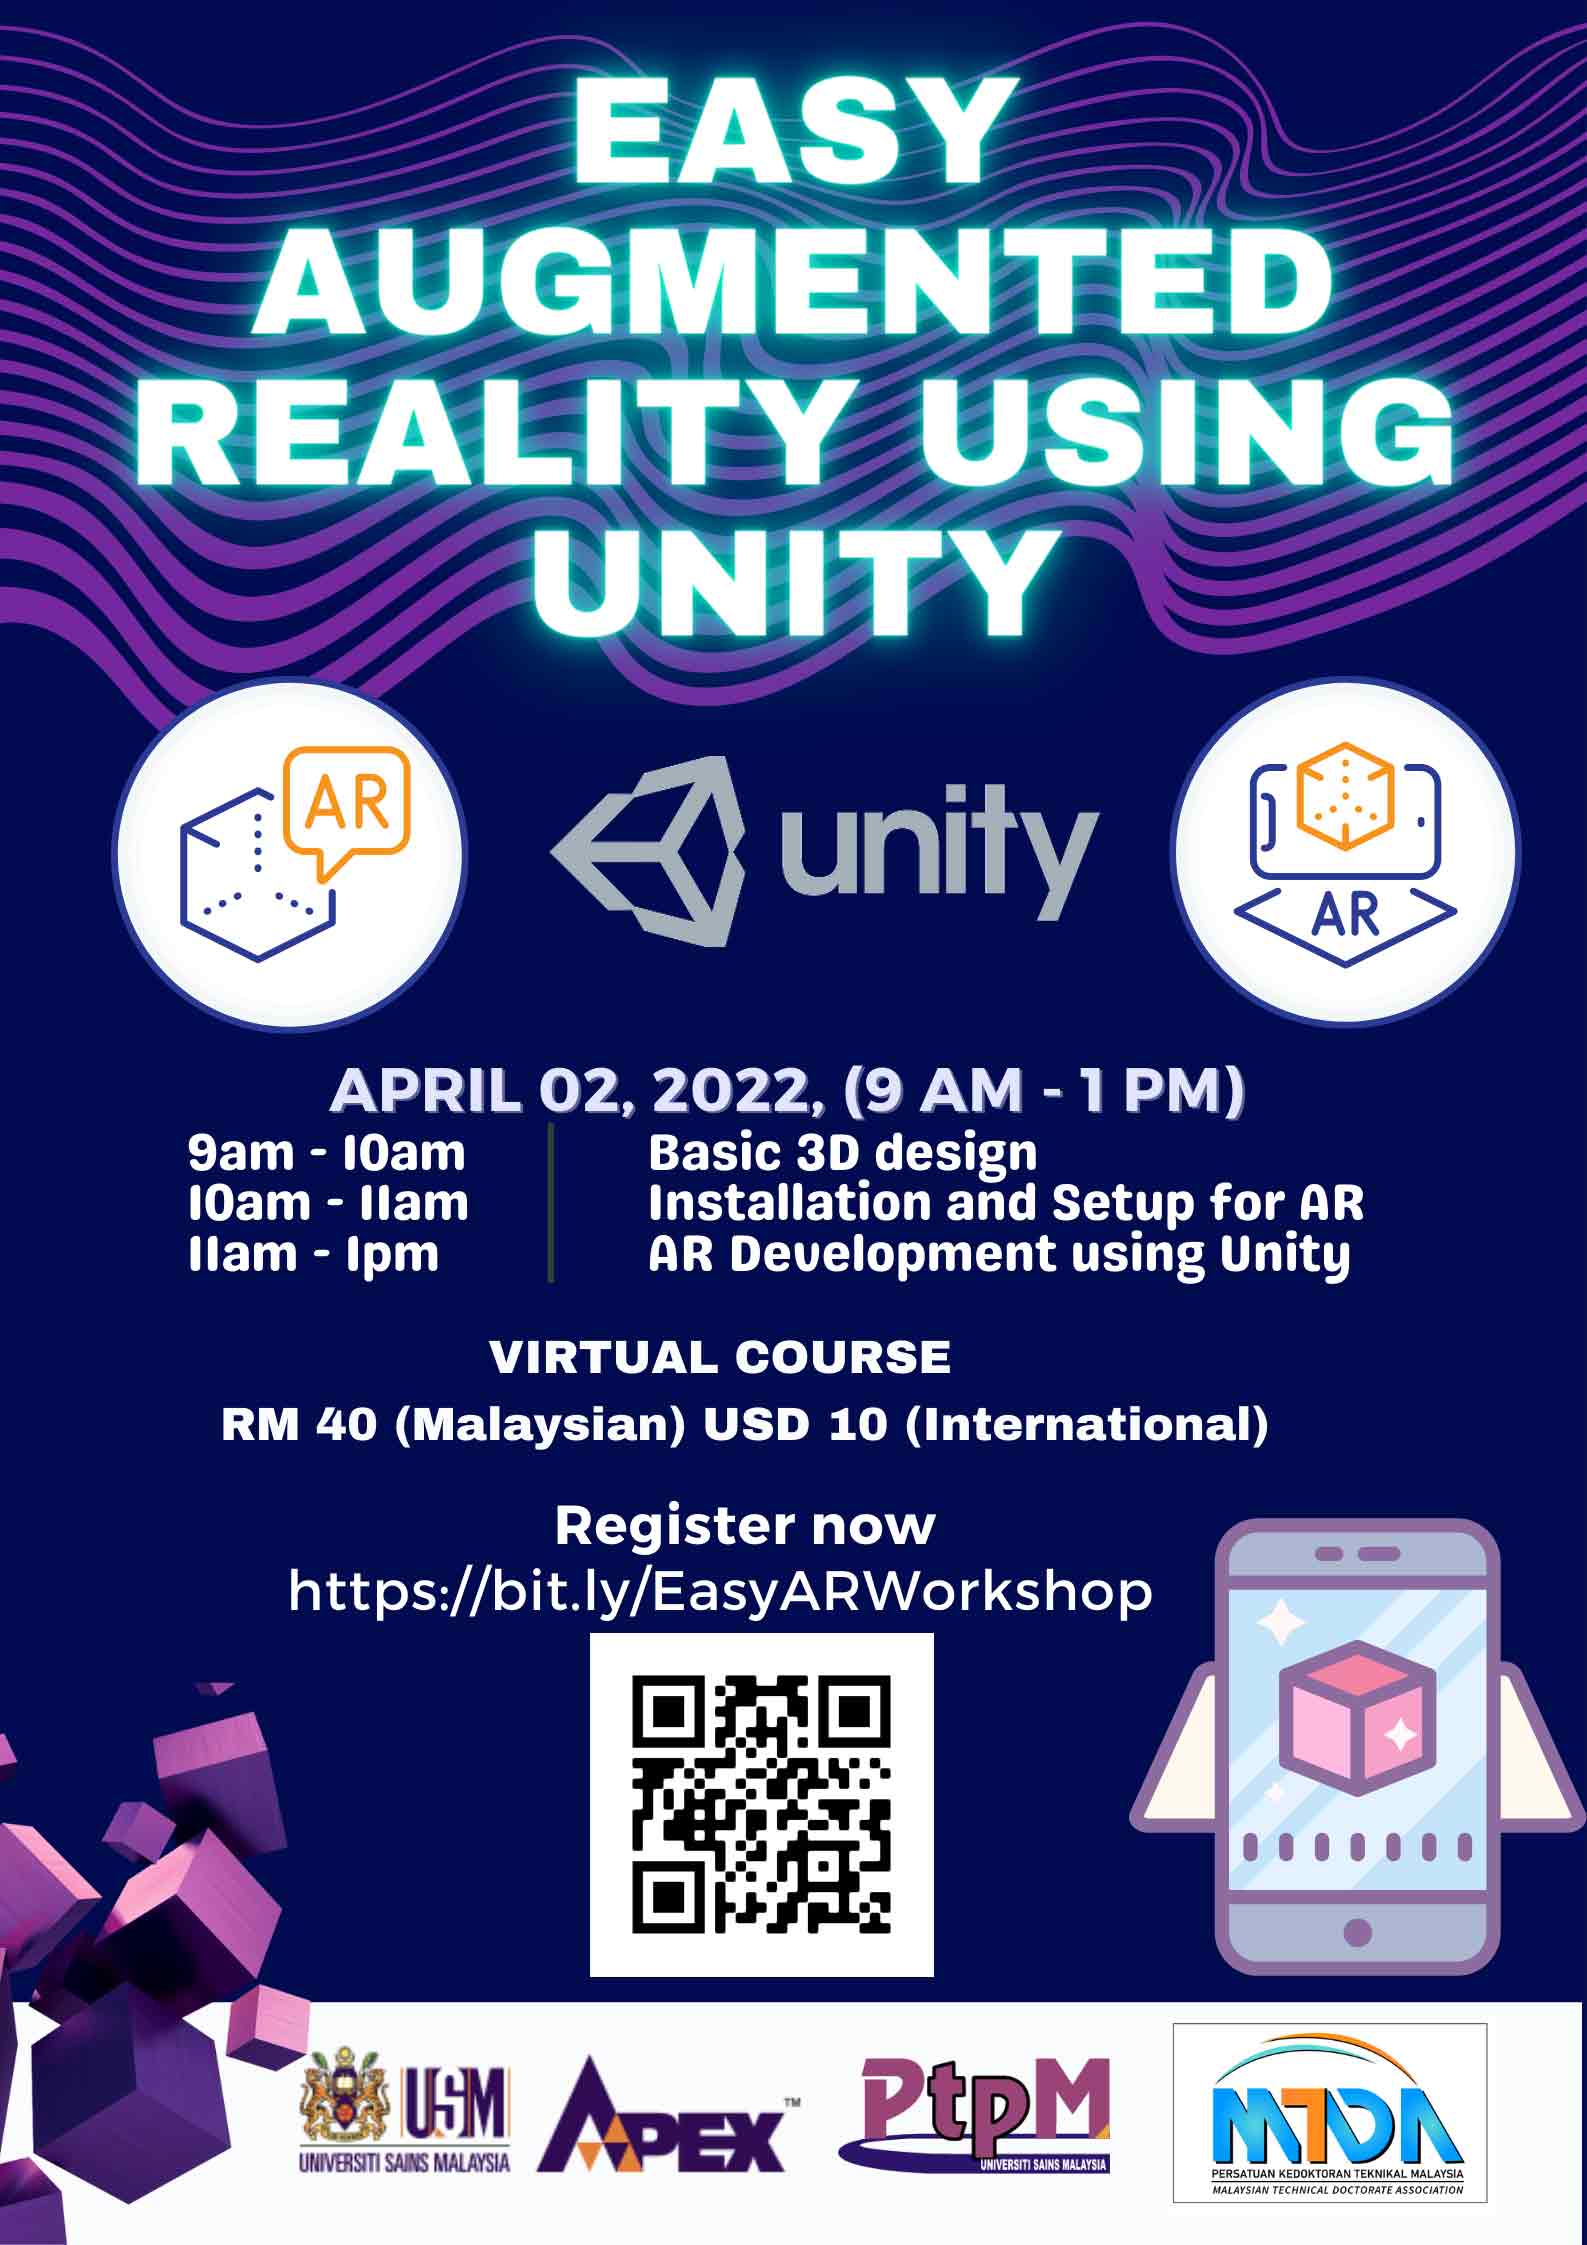 WORKSHOP-EASY-AUGMENTED-REALITY-USING-UNITY.jpg